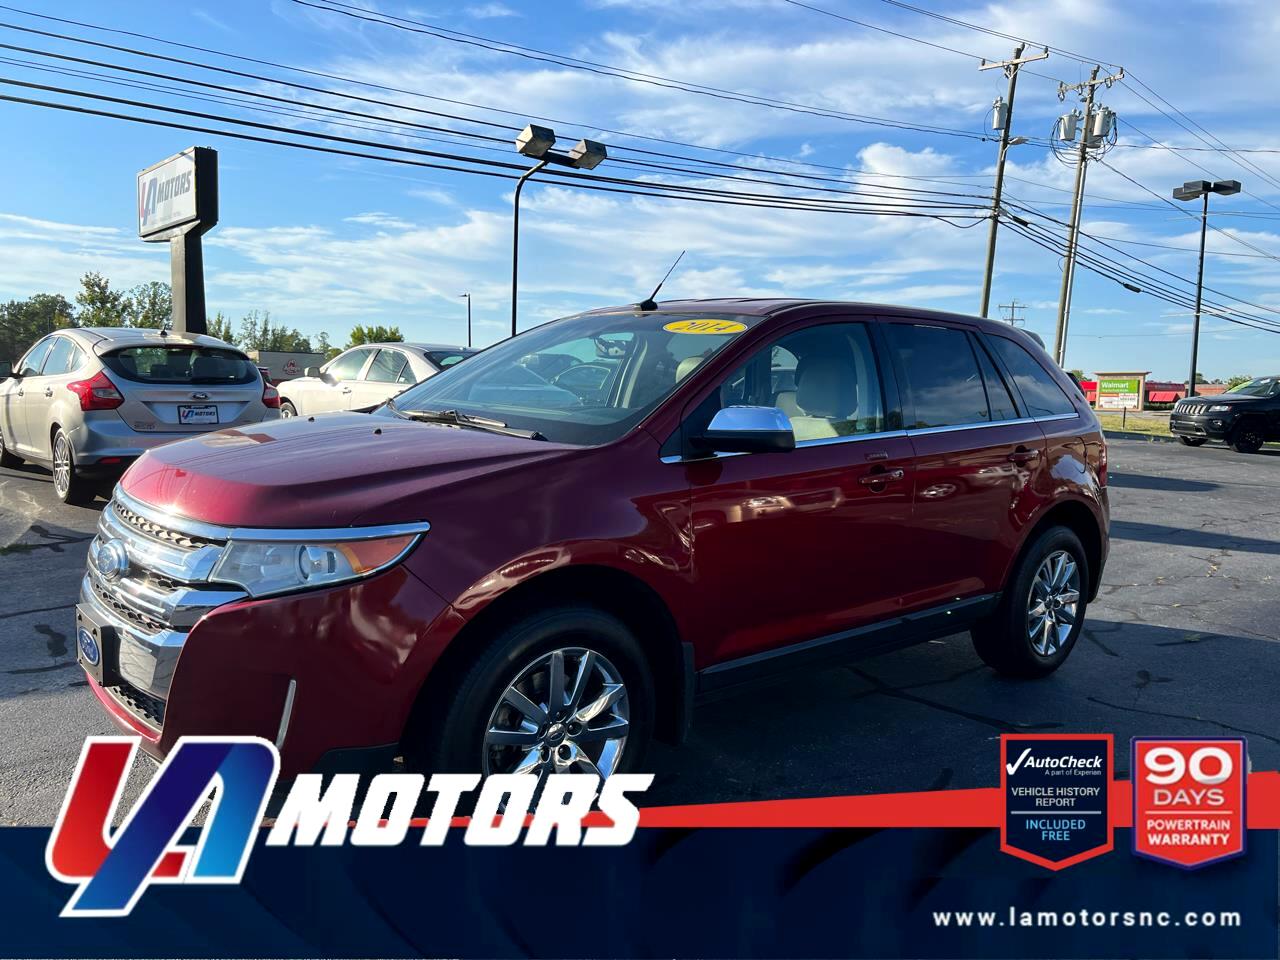 2014 Ford Edge 4dr Limited FWD